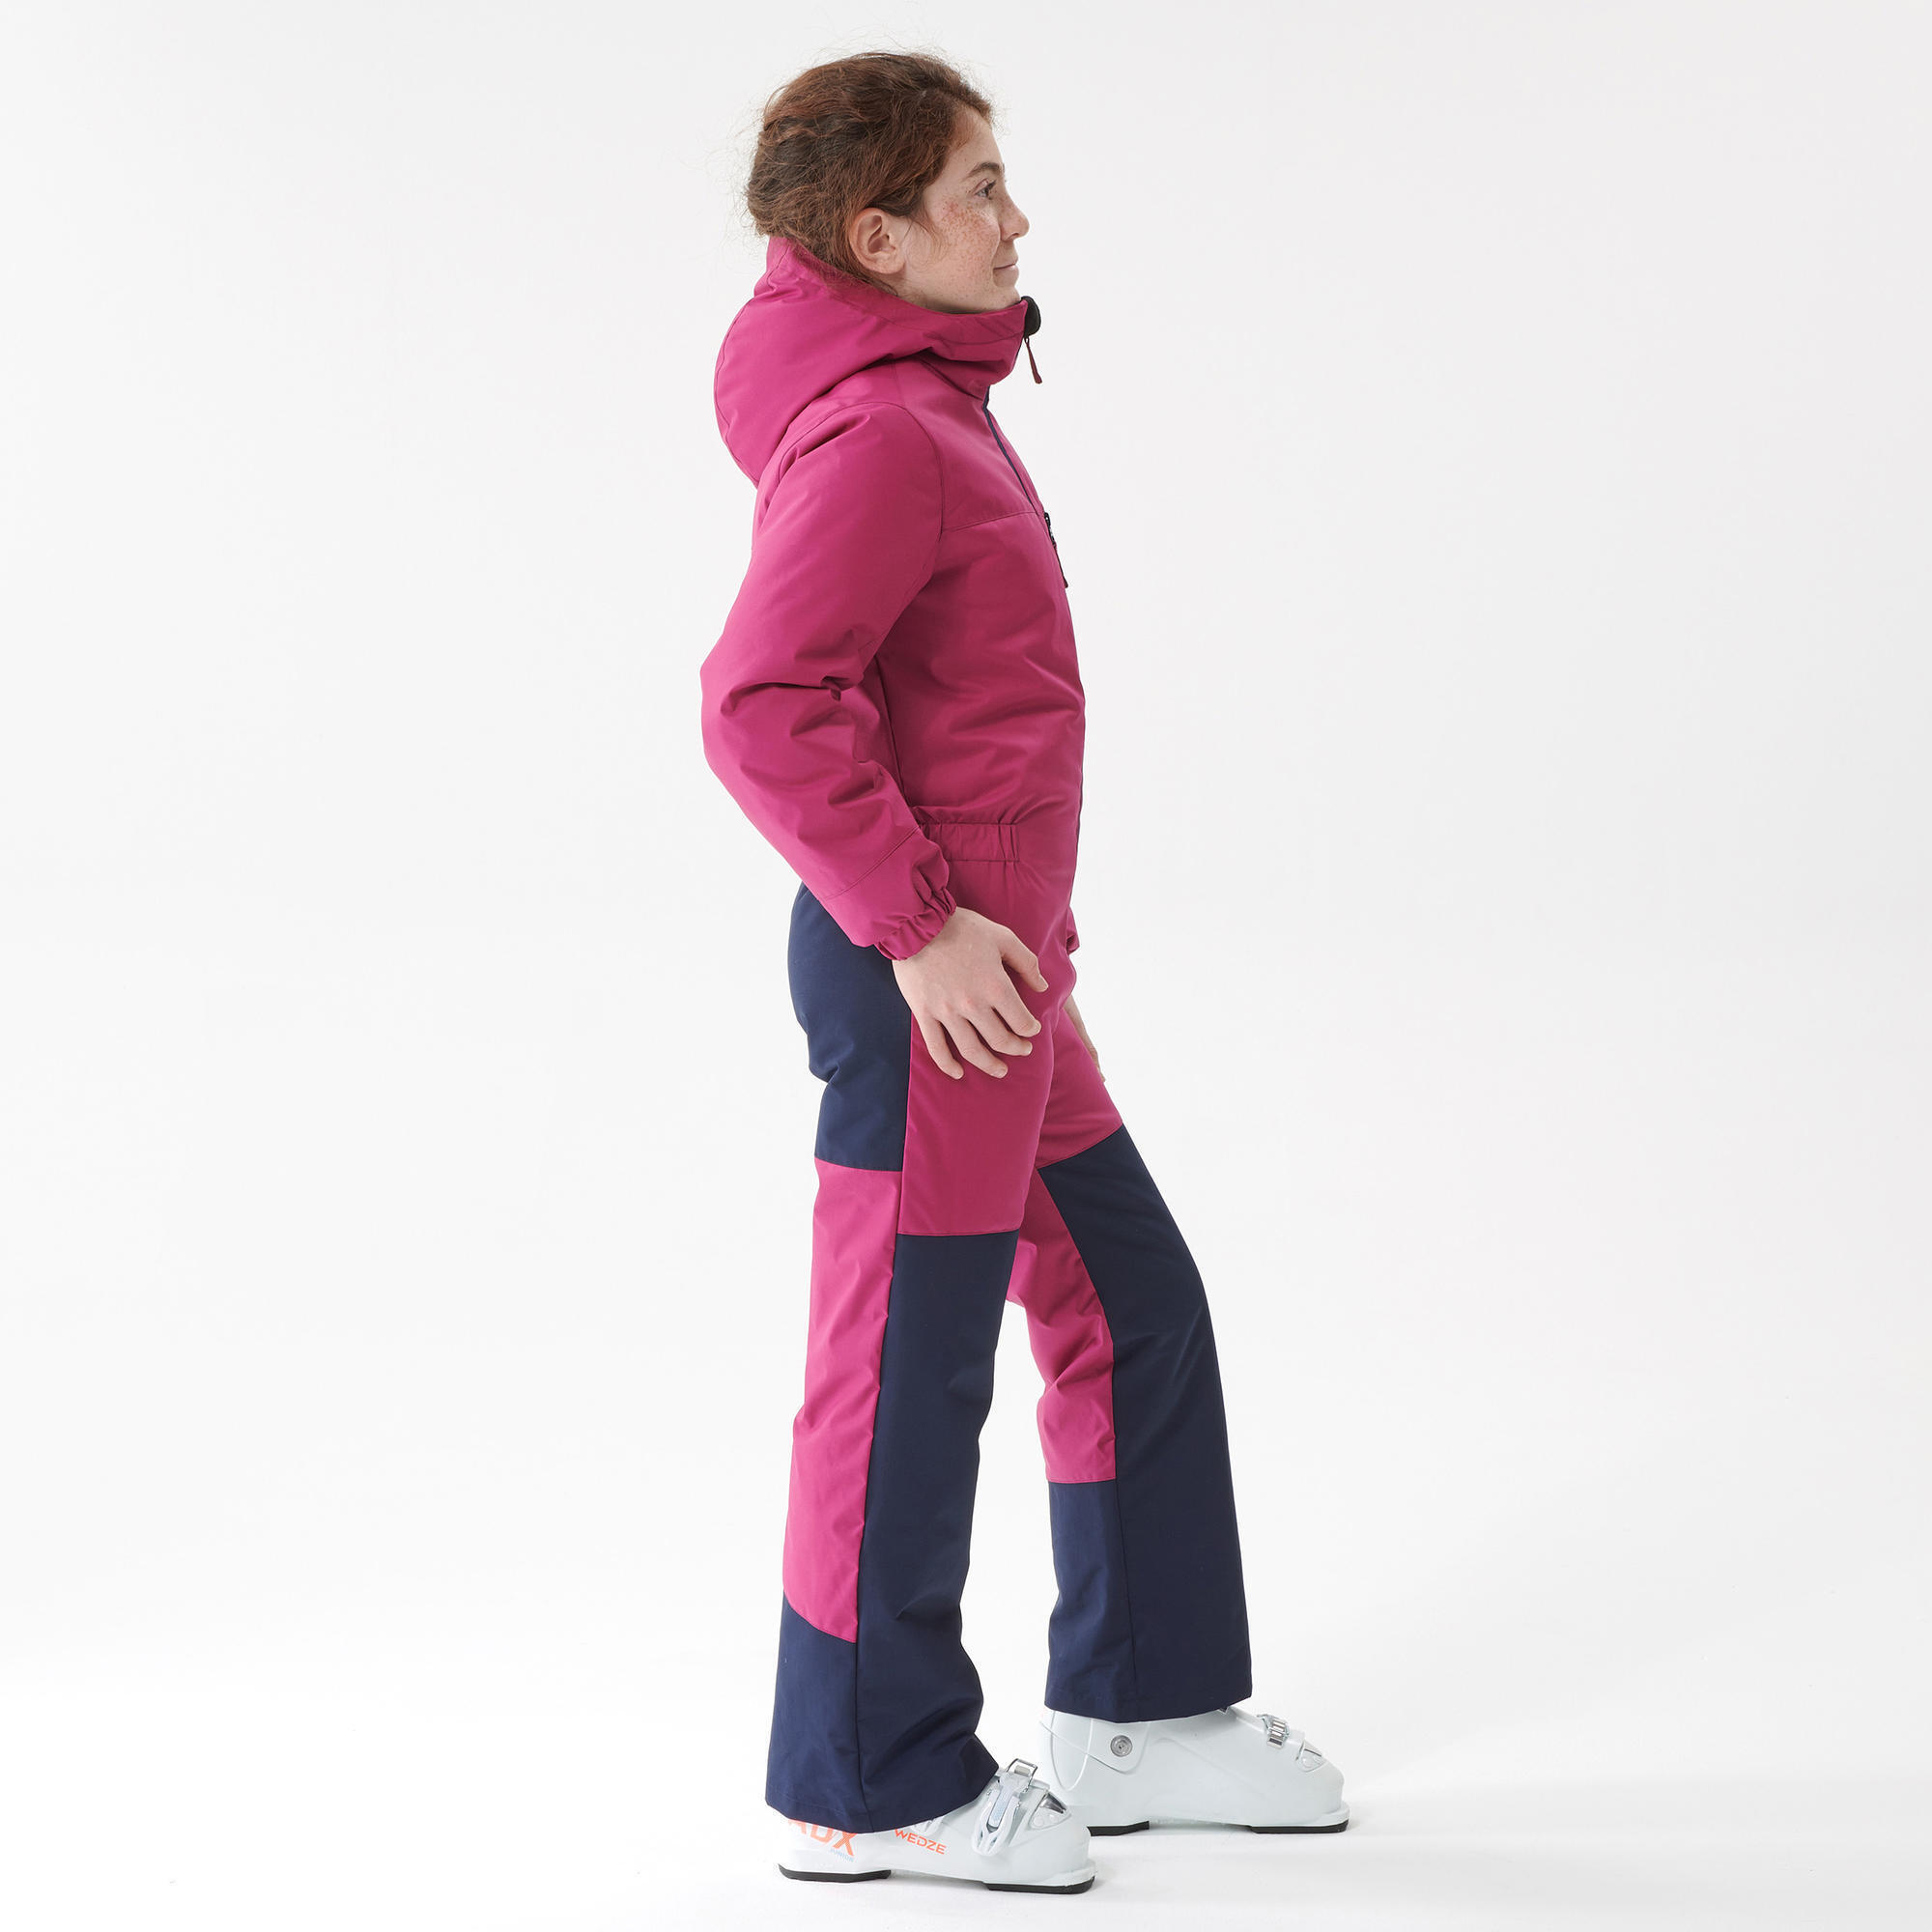 KIDS’ WARM AND WATERPROOF SKI SUIT - 100 - PINK AND NAVY BLUE  3/6